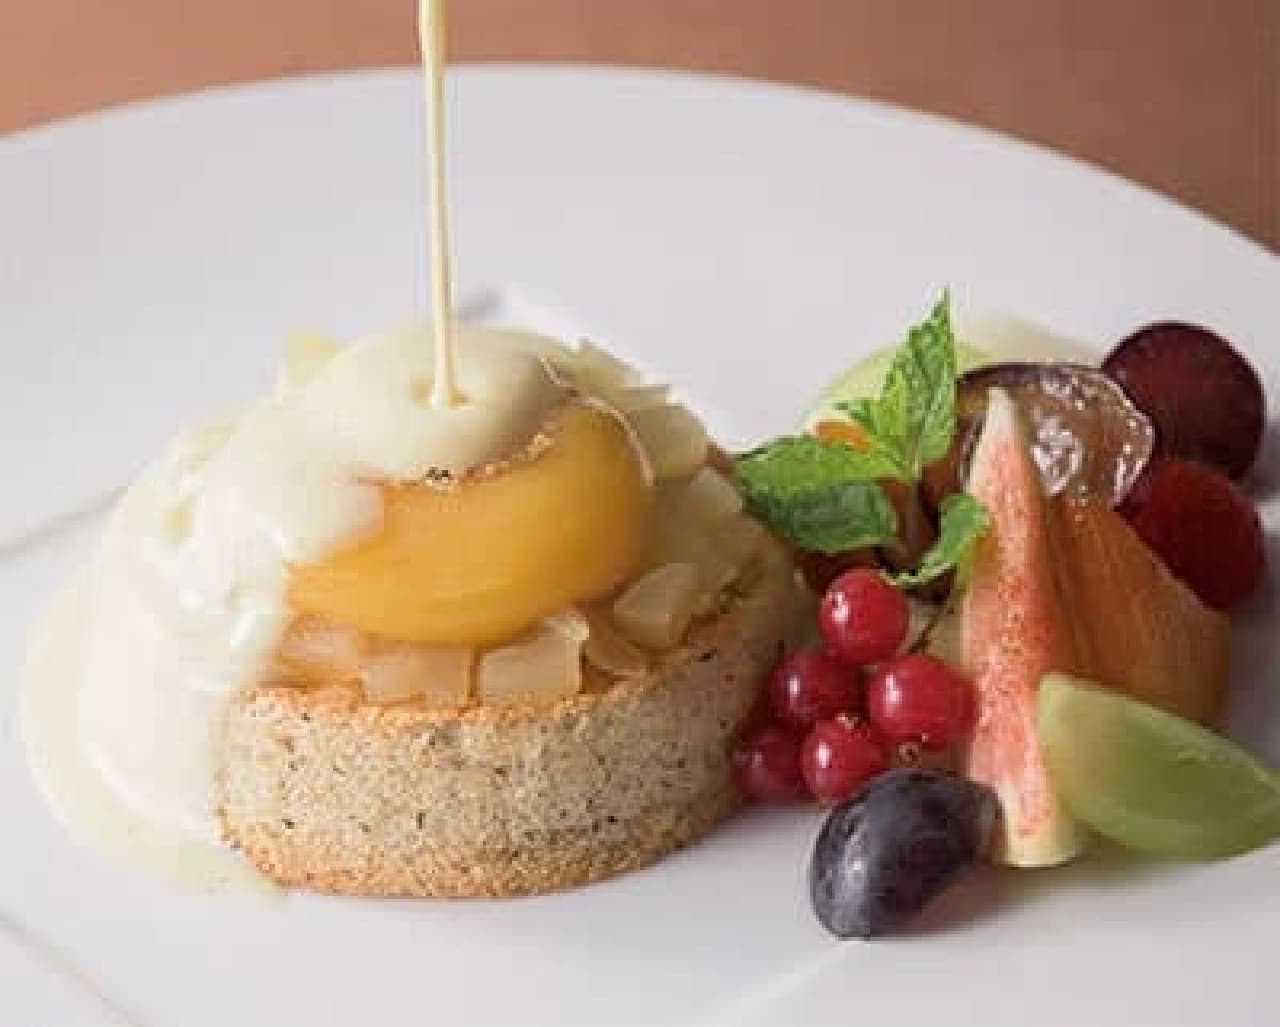 Eggs Benedict transforms into sweets?